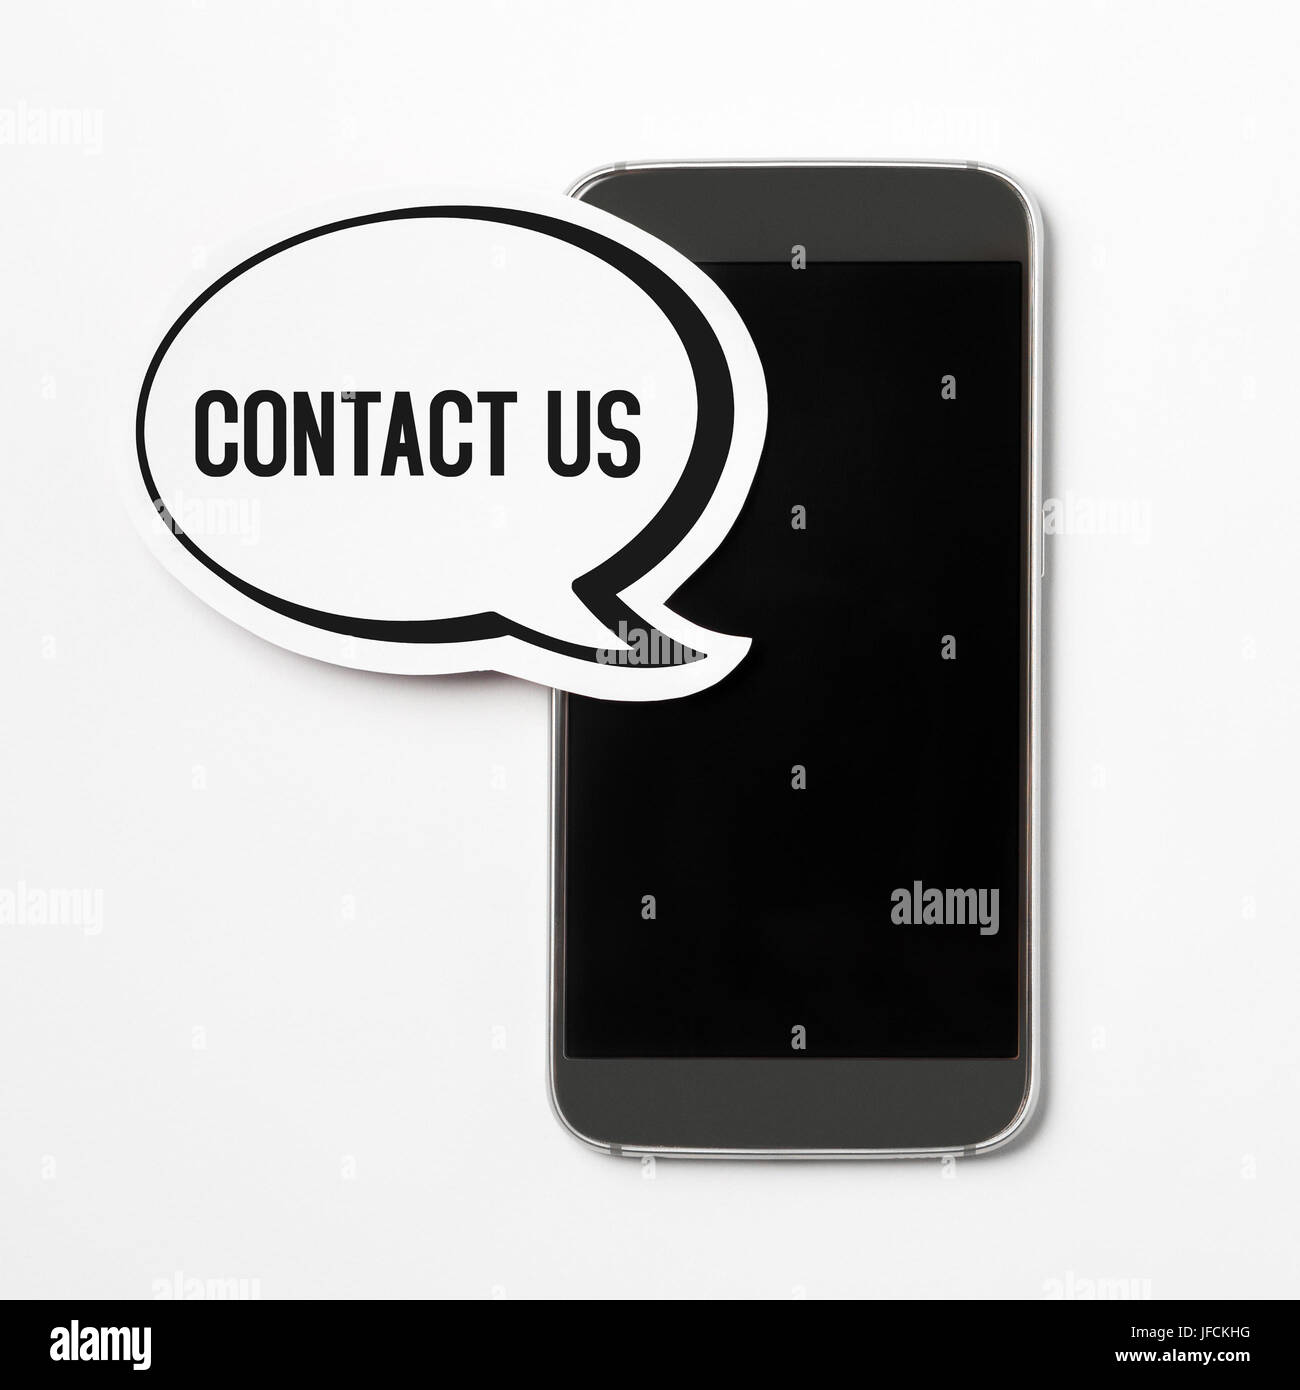 Contact us text in a speech bubble with a smartphone. Speech balloon cut from cardboard. Information button, icon or banner for website, social media Stock Photo